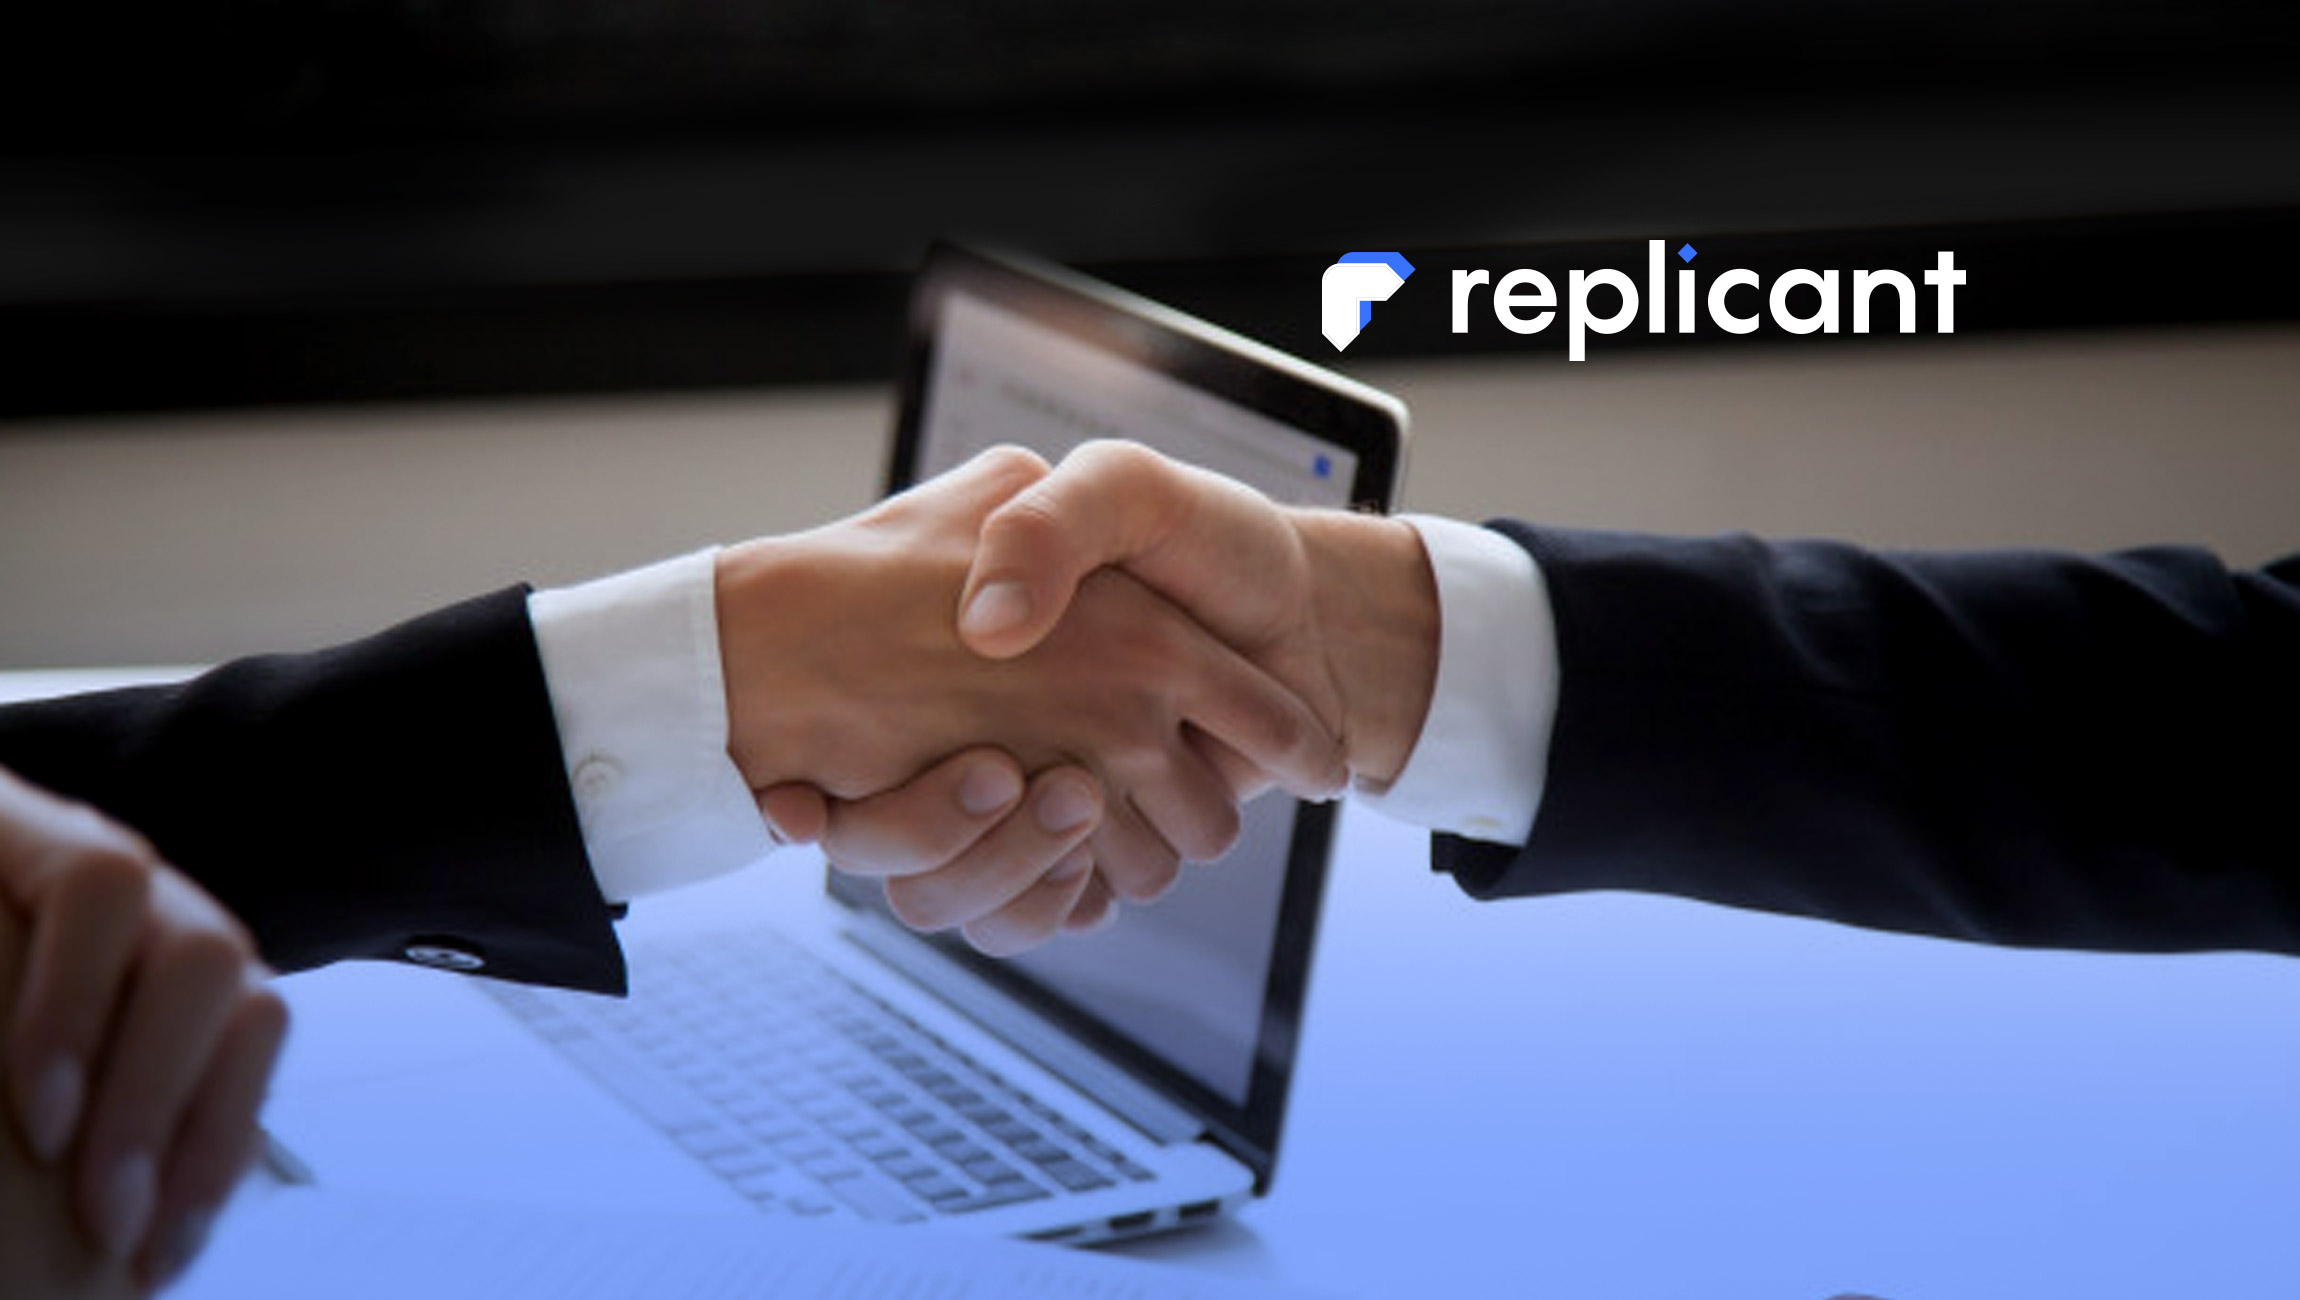 Replicant Introduces AI Voice Responder to Support Call Centers During COVID-19